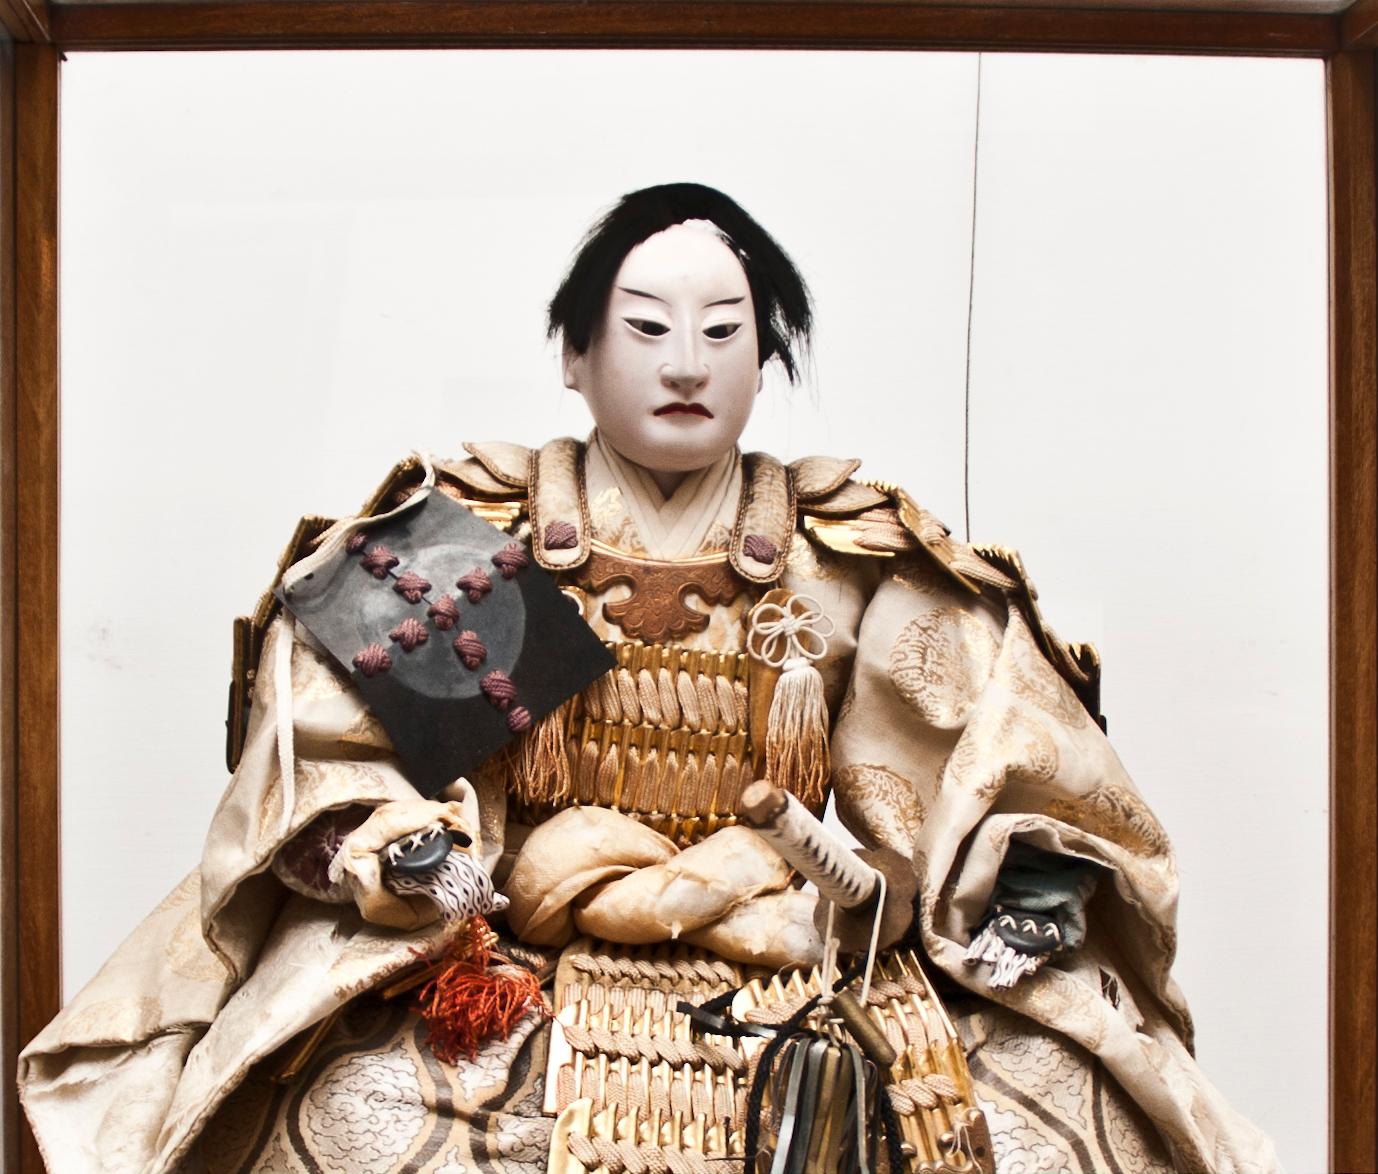 Beautiful antique Samurai Doll, Japanese manufacture, end of 18th century. 
Given as a present to young boys becoming adults, it is finely decorated with original 18th century dresses. Shoes and even the sword are realistic and separate from the